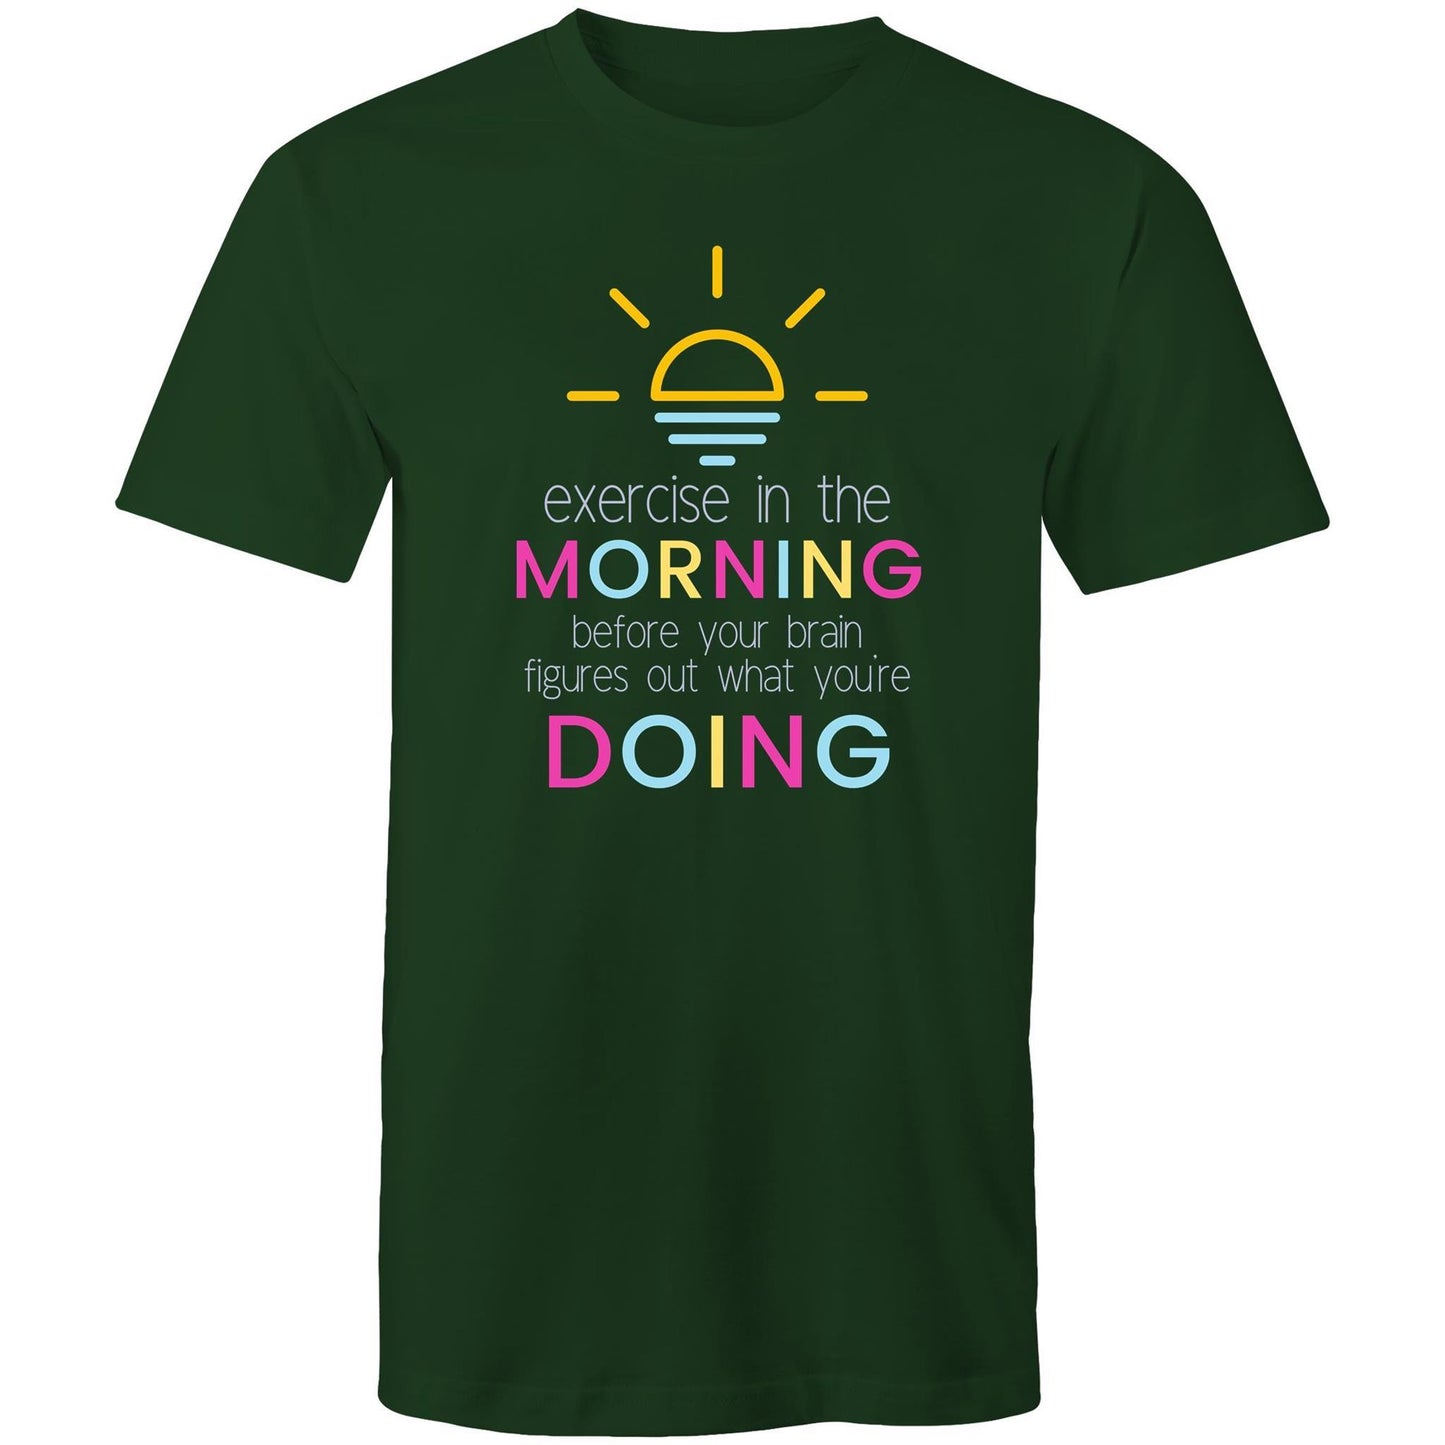 Exercise In The Morning - Short Sleeve T-shirt Forest Green Fitness T-shirt Fitness Mens Womens